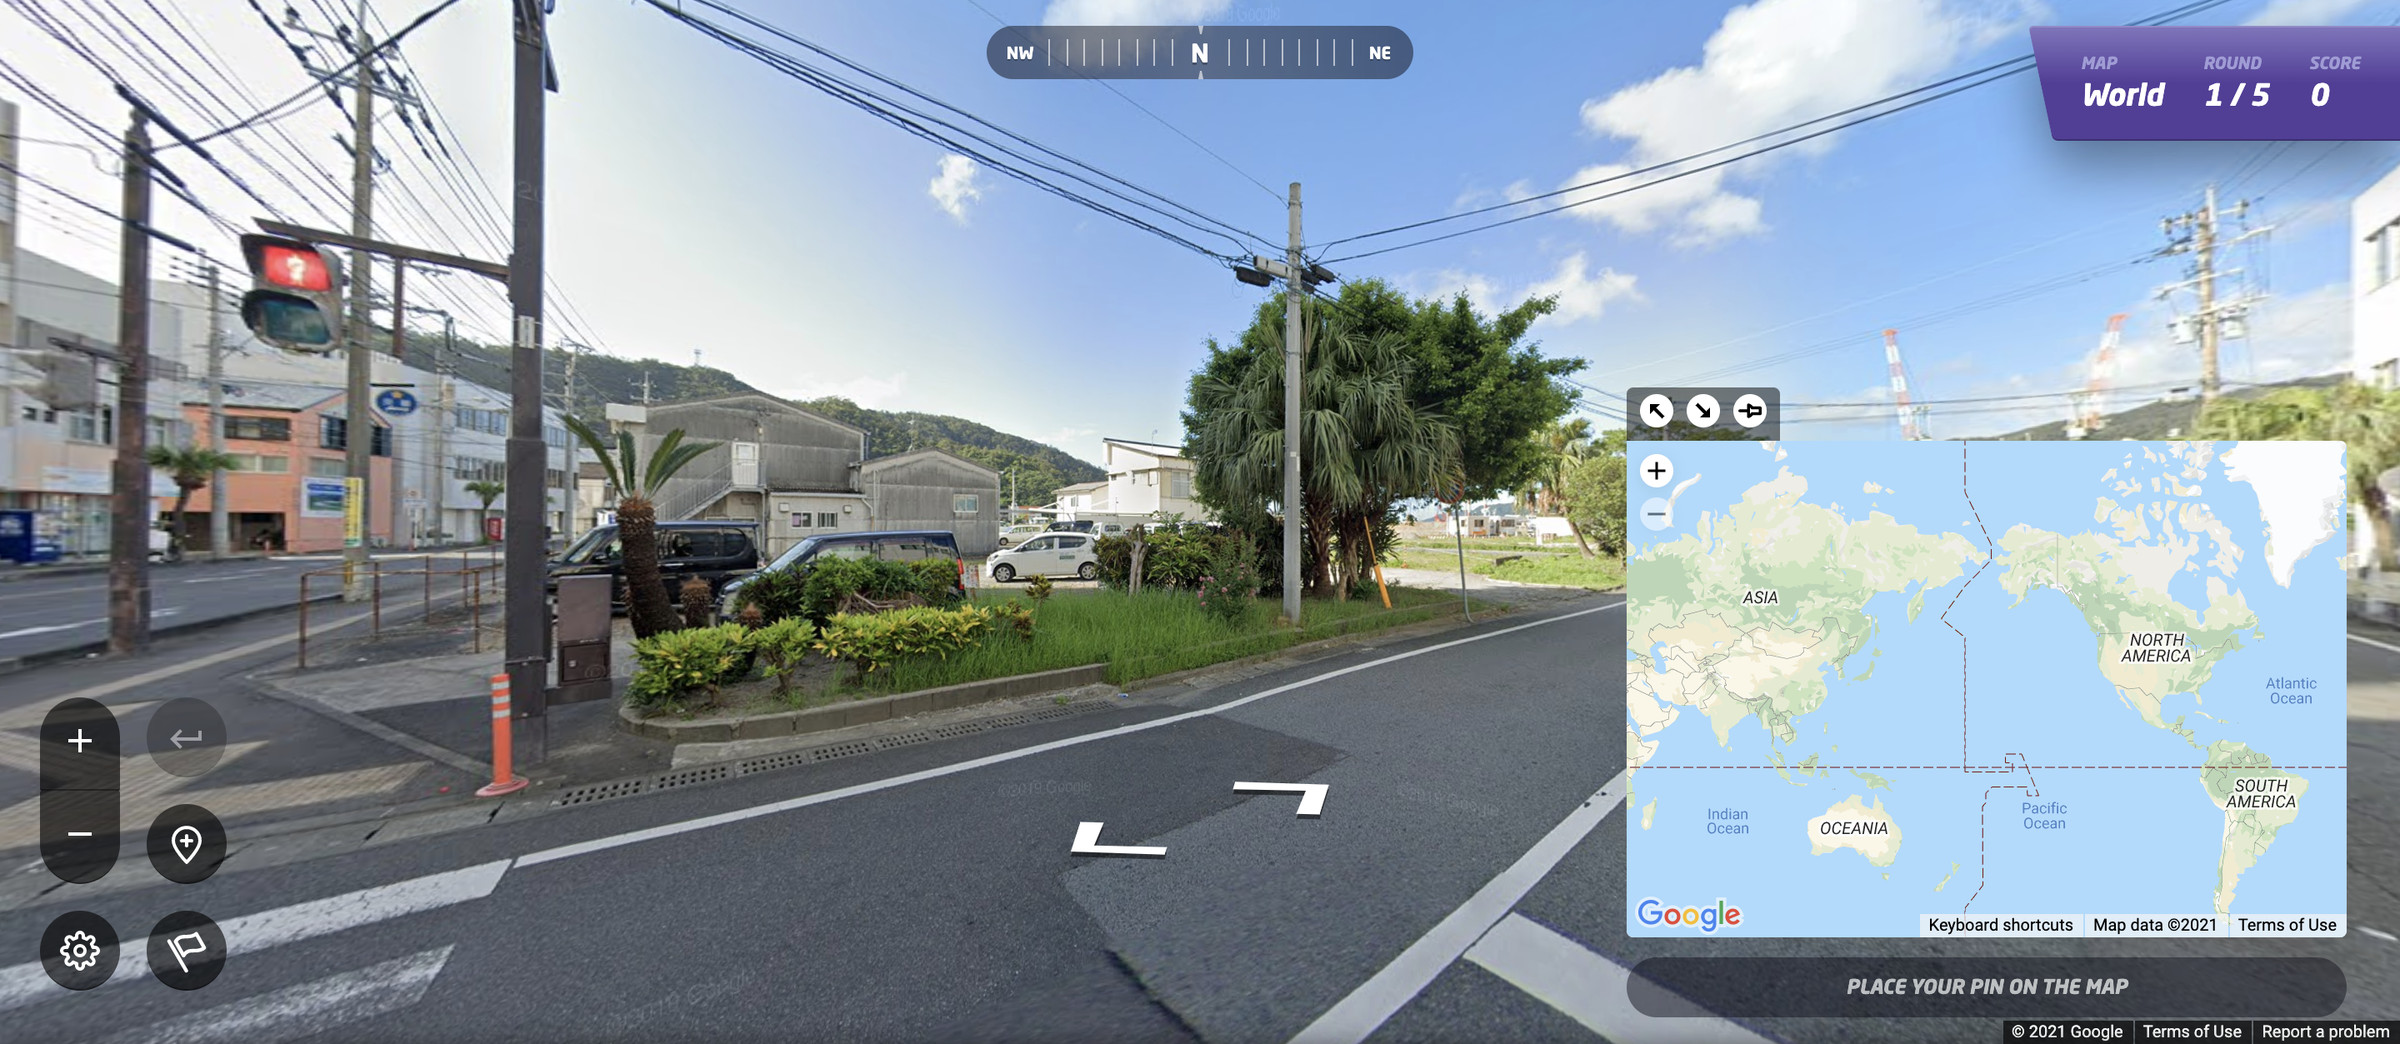 A screenshot of GeoGuessr showing a road, a tree, some buildings, and power lines. Google Street View controls let the player manipulate the game. A map in the bottom right corner lets players guess where they are.